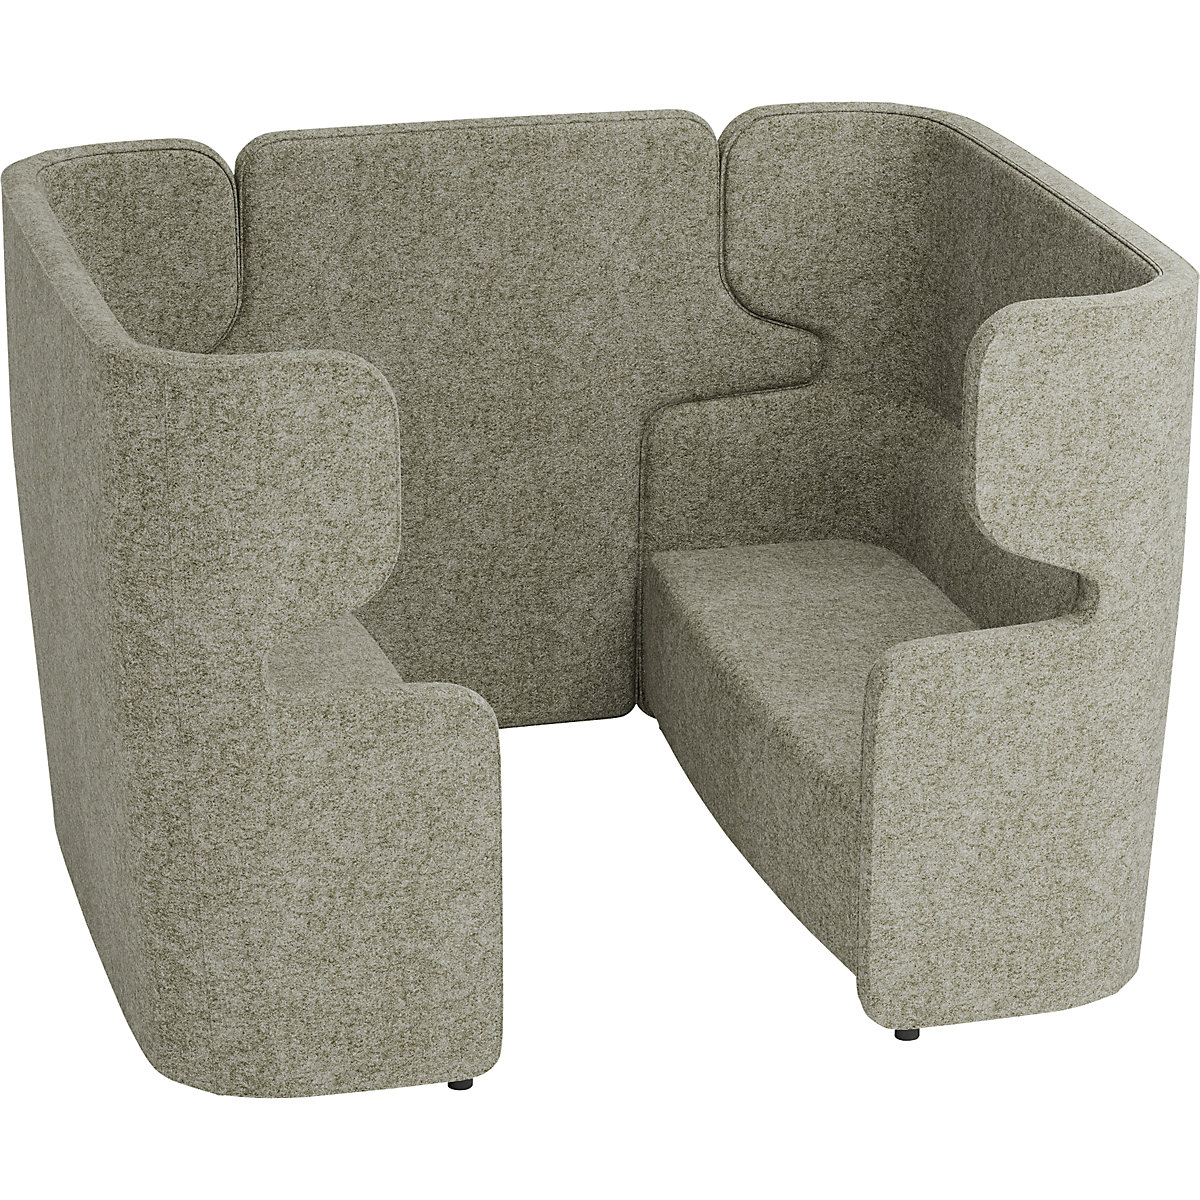 VIVO acoustic sofa – BISLEY, 2 two-seaters with high back rest, centre divider, light grey